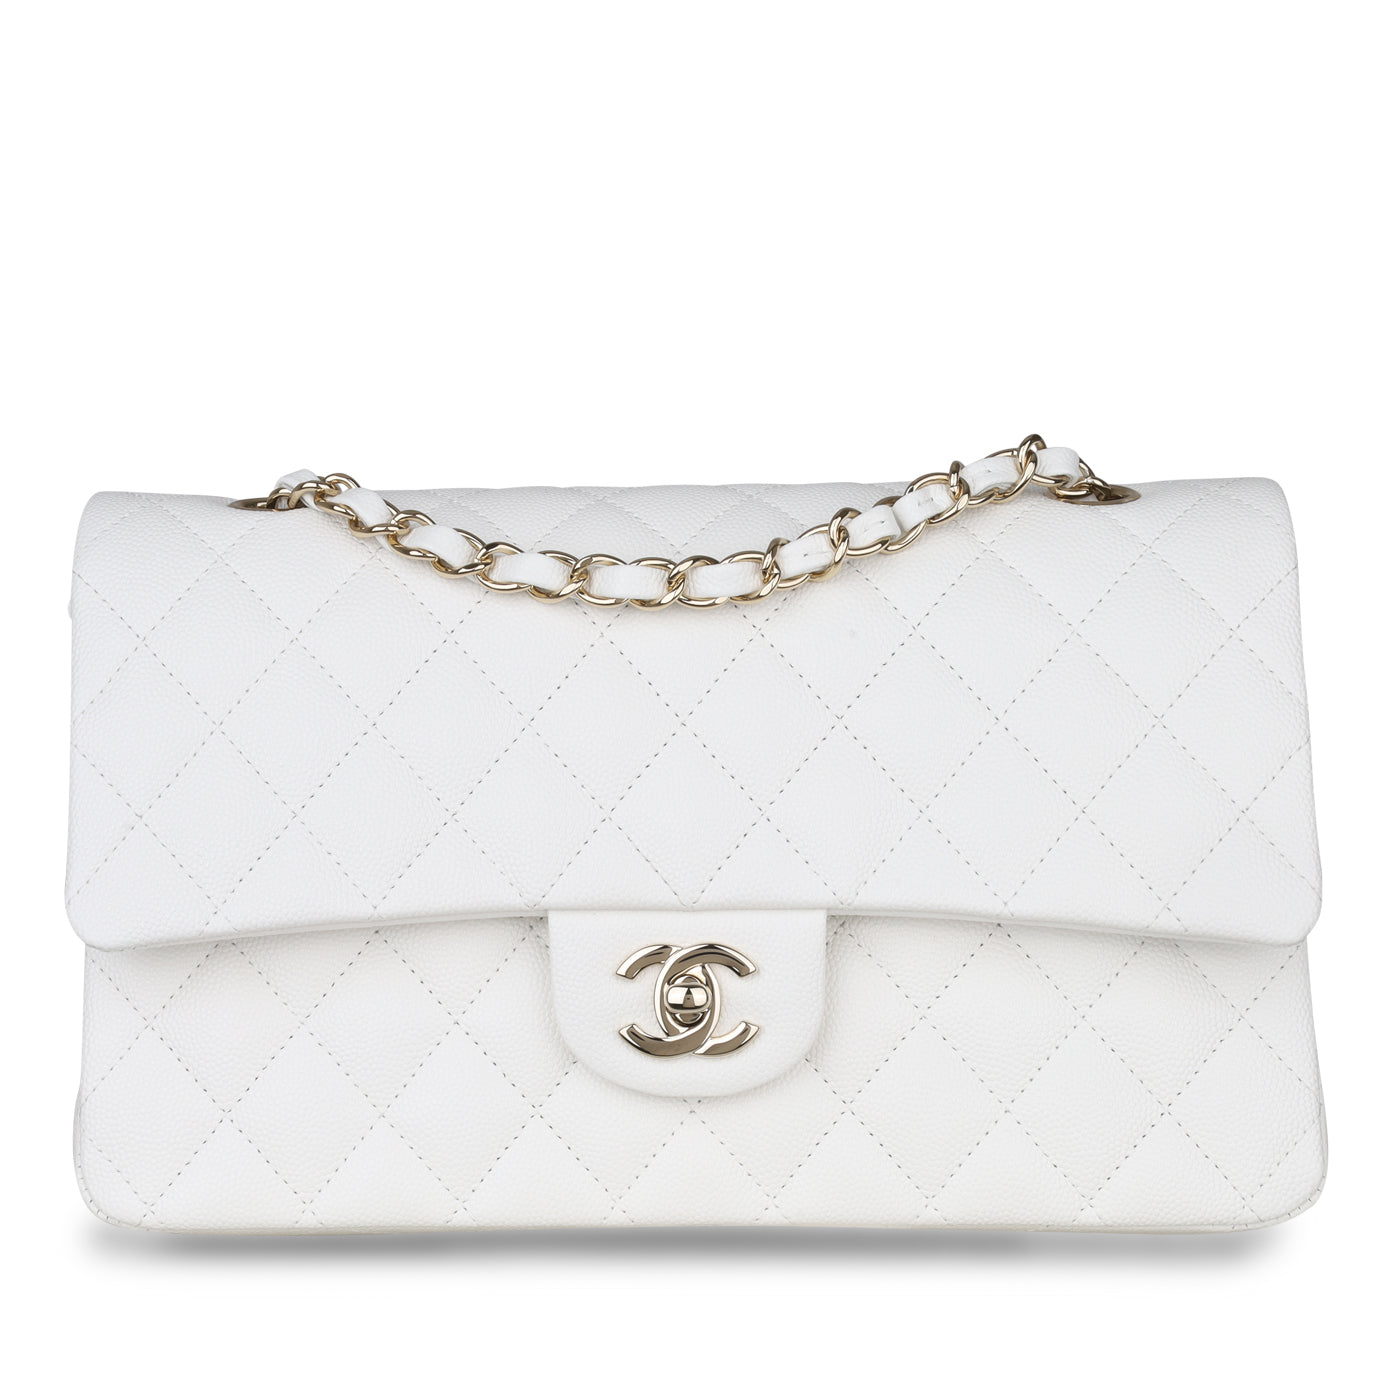 Chanel 21A white classic flap first impressions  review  medium white  caviar  my first white bag  YouTube